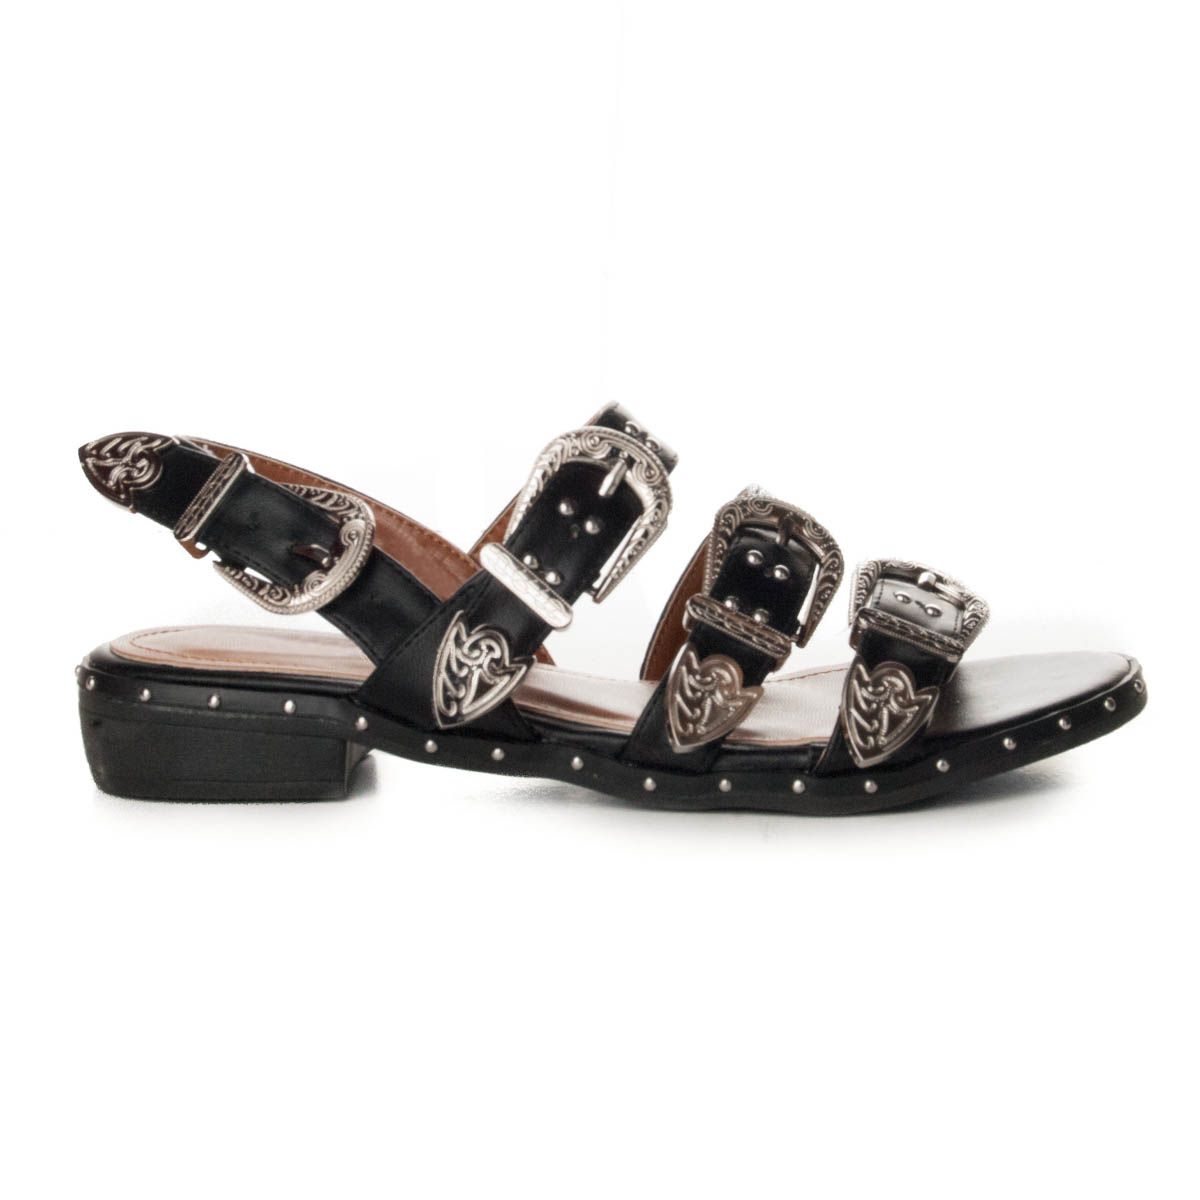 Sandal decorated with brooches and tacks. Fastened in the ankle by metal brooch. It is one of the styles that are more fashionable this summer, for its rocker style. Very comfortable and current.